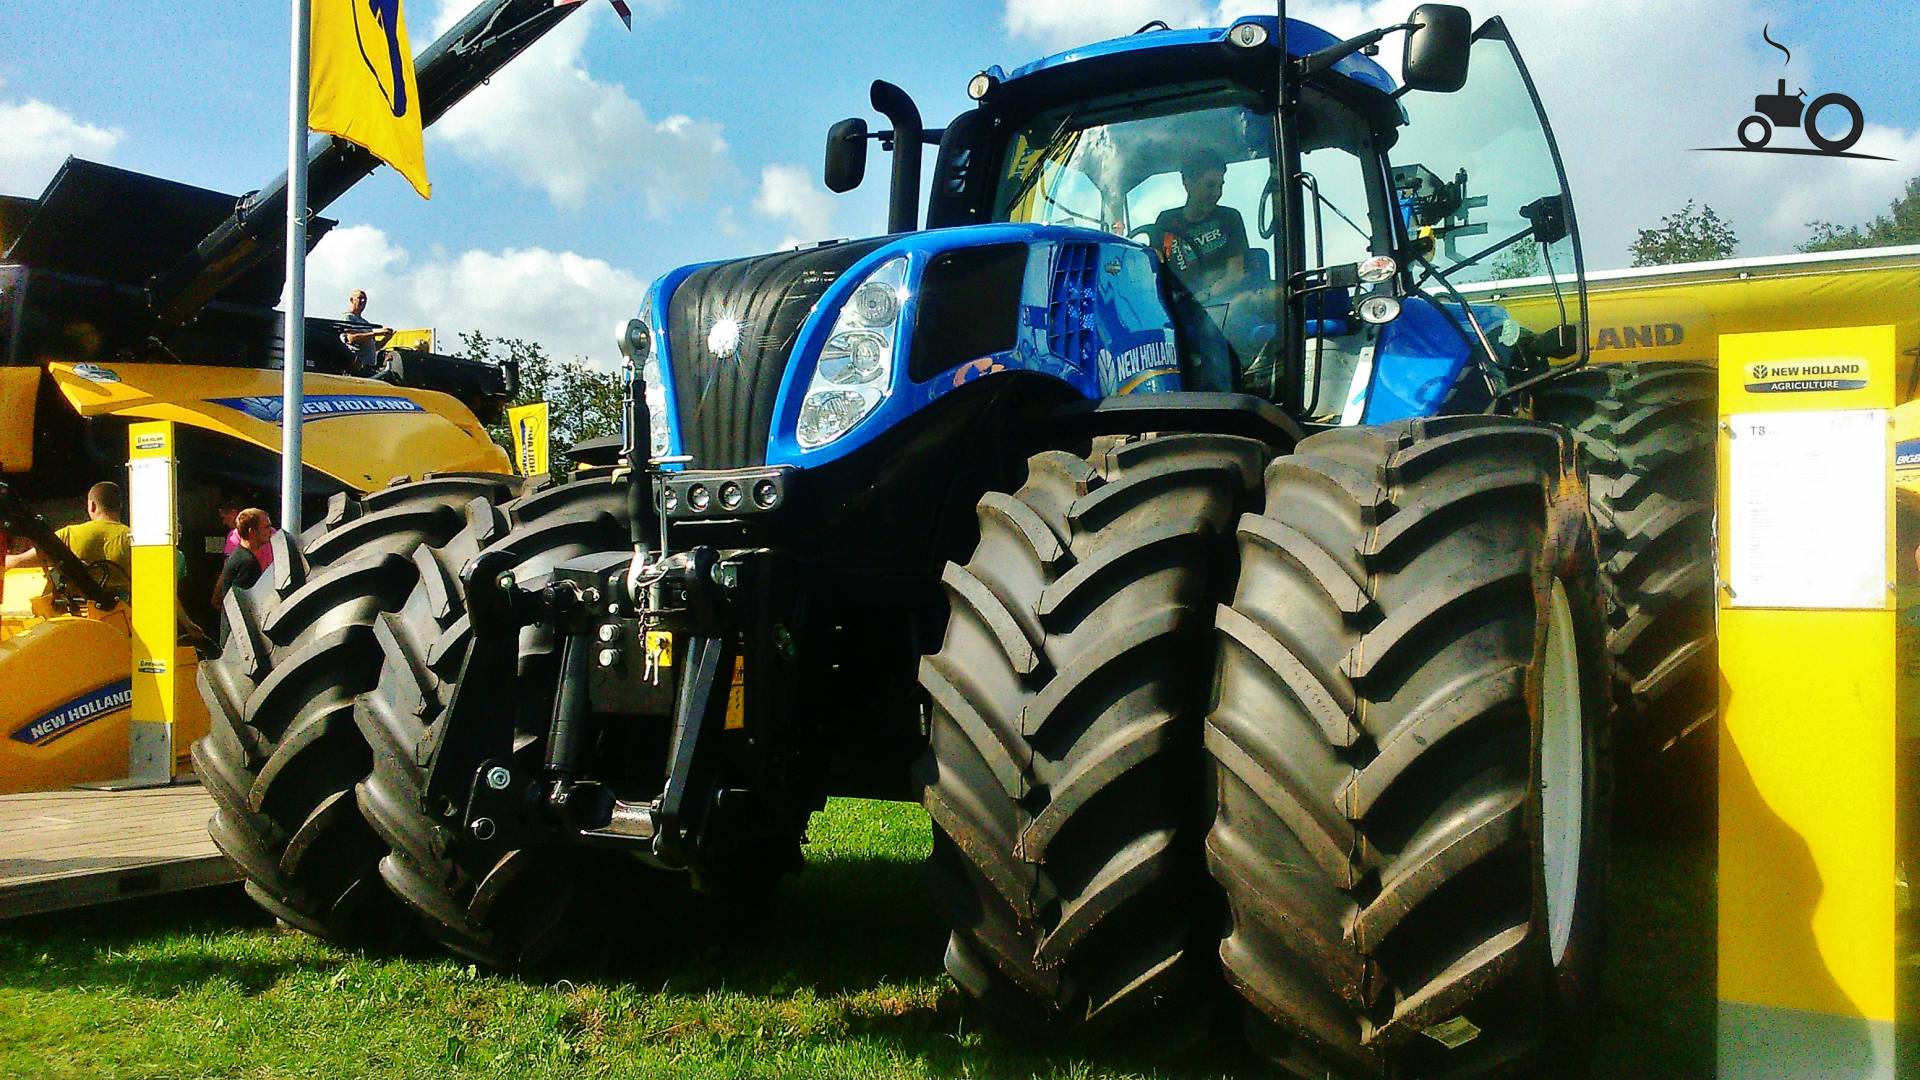 New Holland T 8.420